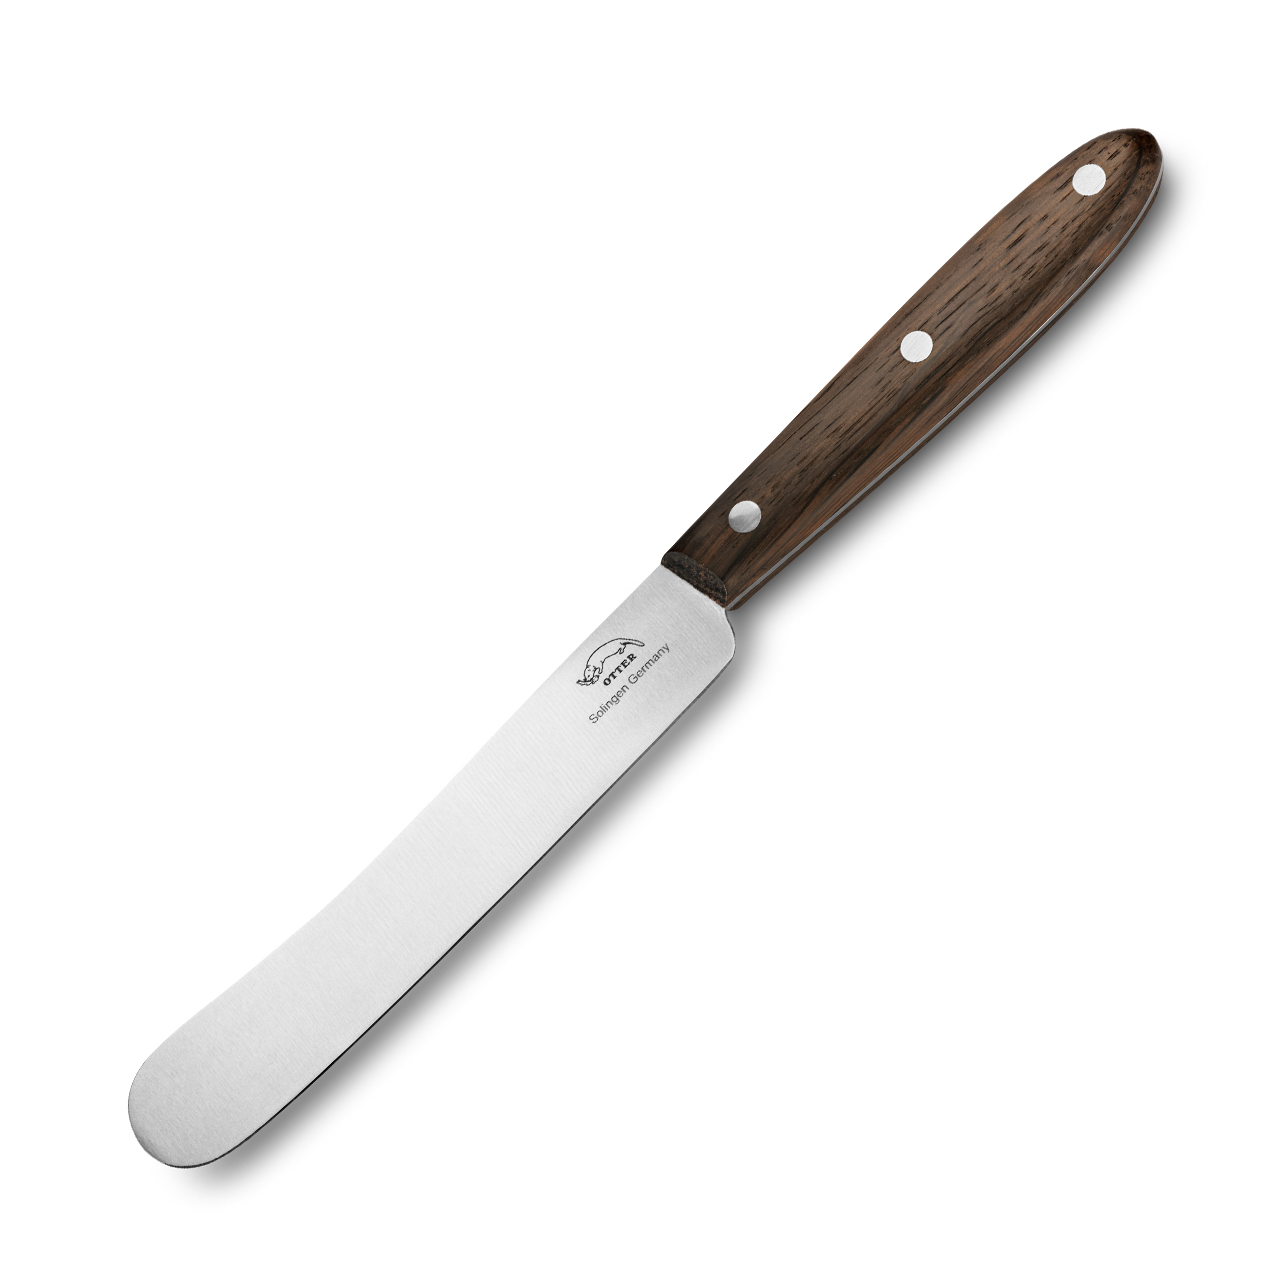 Table knife with cutting board in gift box